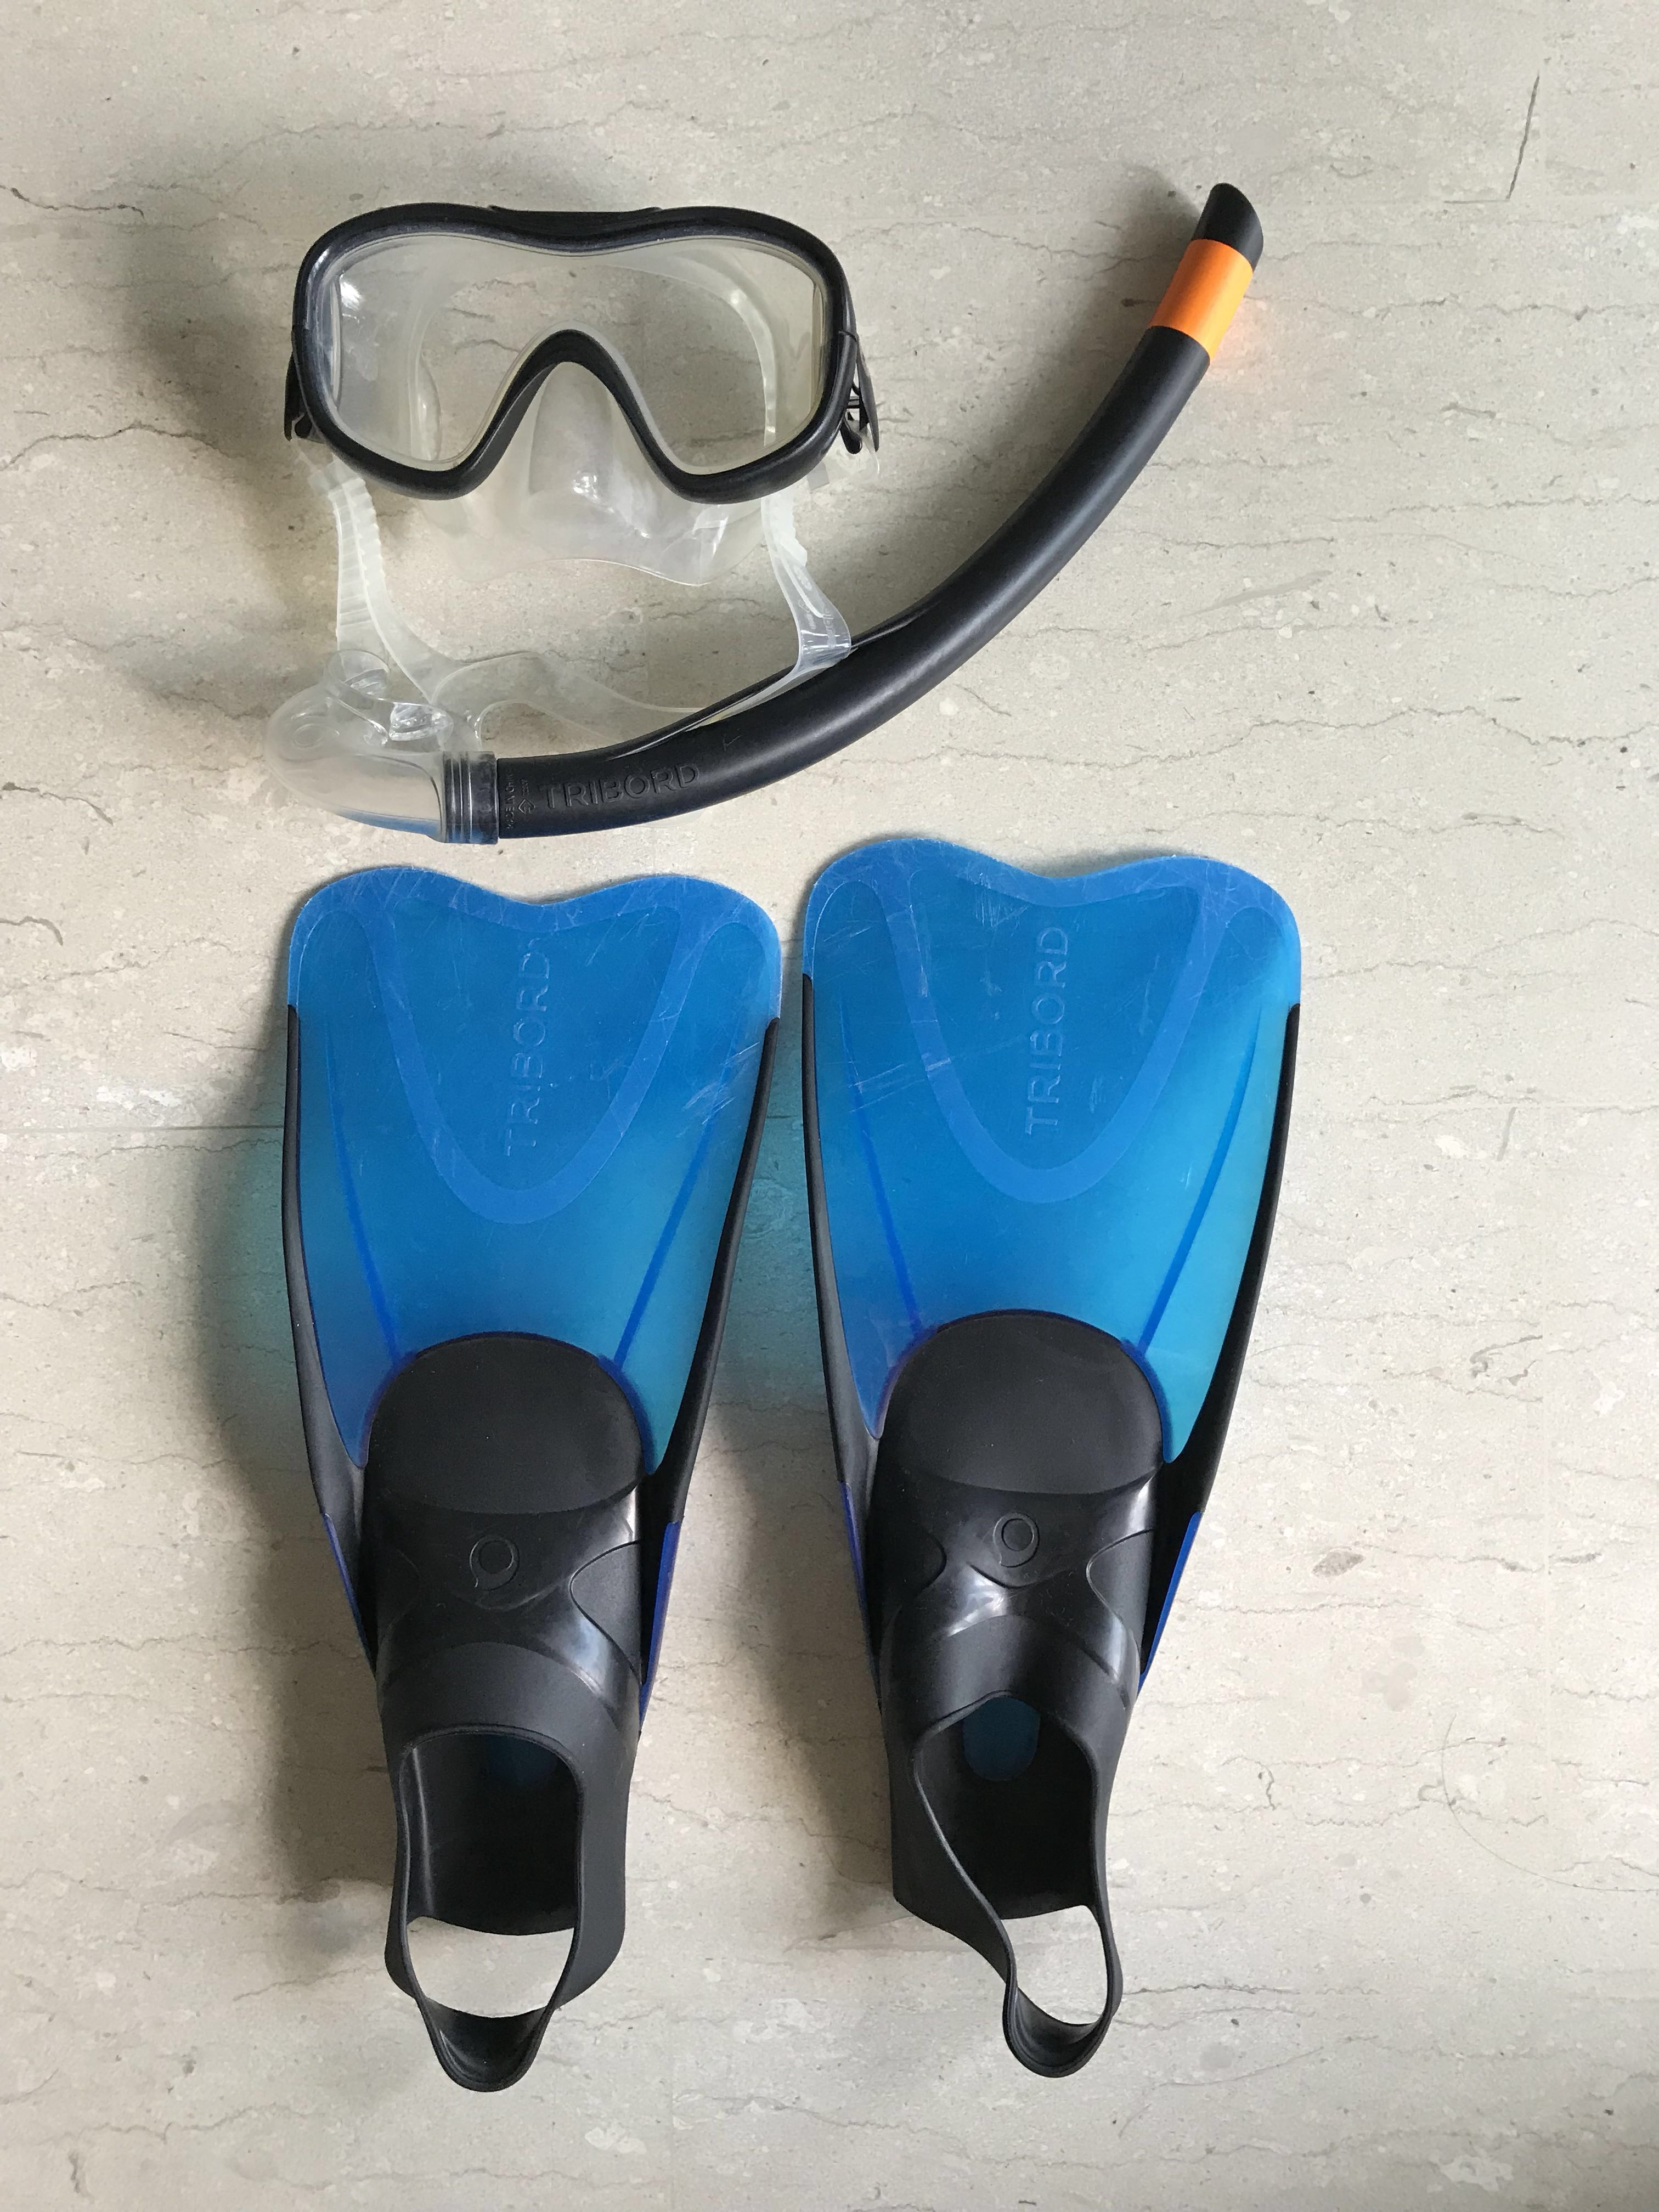 Decathlon snorkeling mask and fins, Sports, Sports & Games Equipment on ...